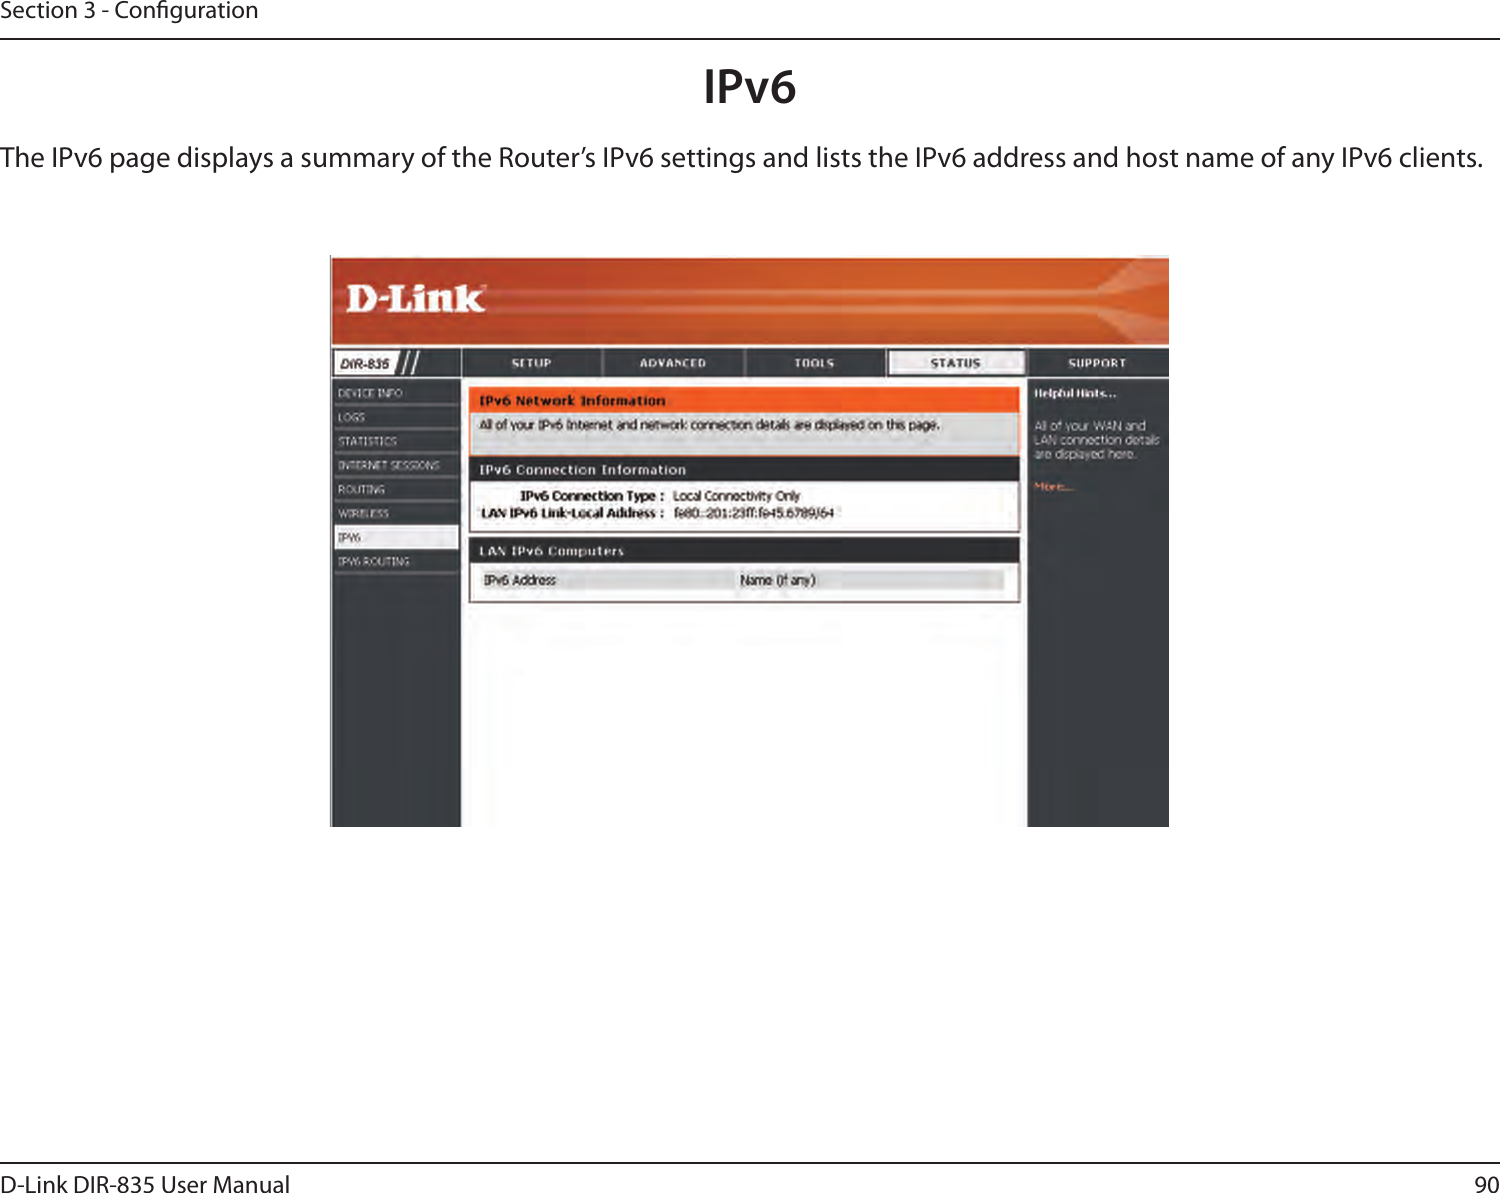 90D-Link DIR-835 User ManualSection 3 - CongurationIPv6The IPv6 page displays a summary of the Router’s IPv6 settings and lists the IPv6 address and host name of any IPv6 clients. 